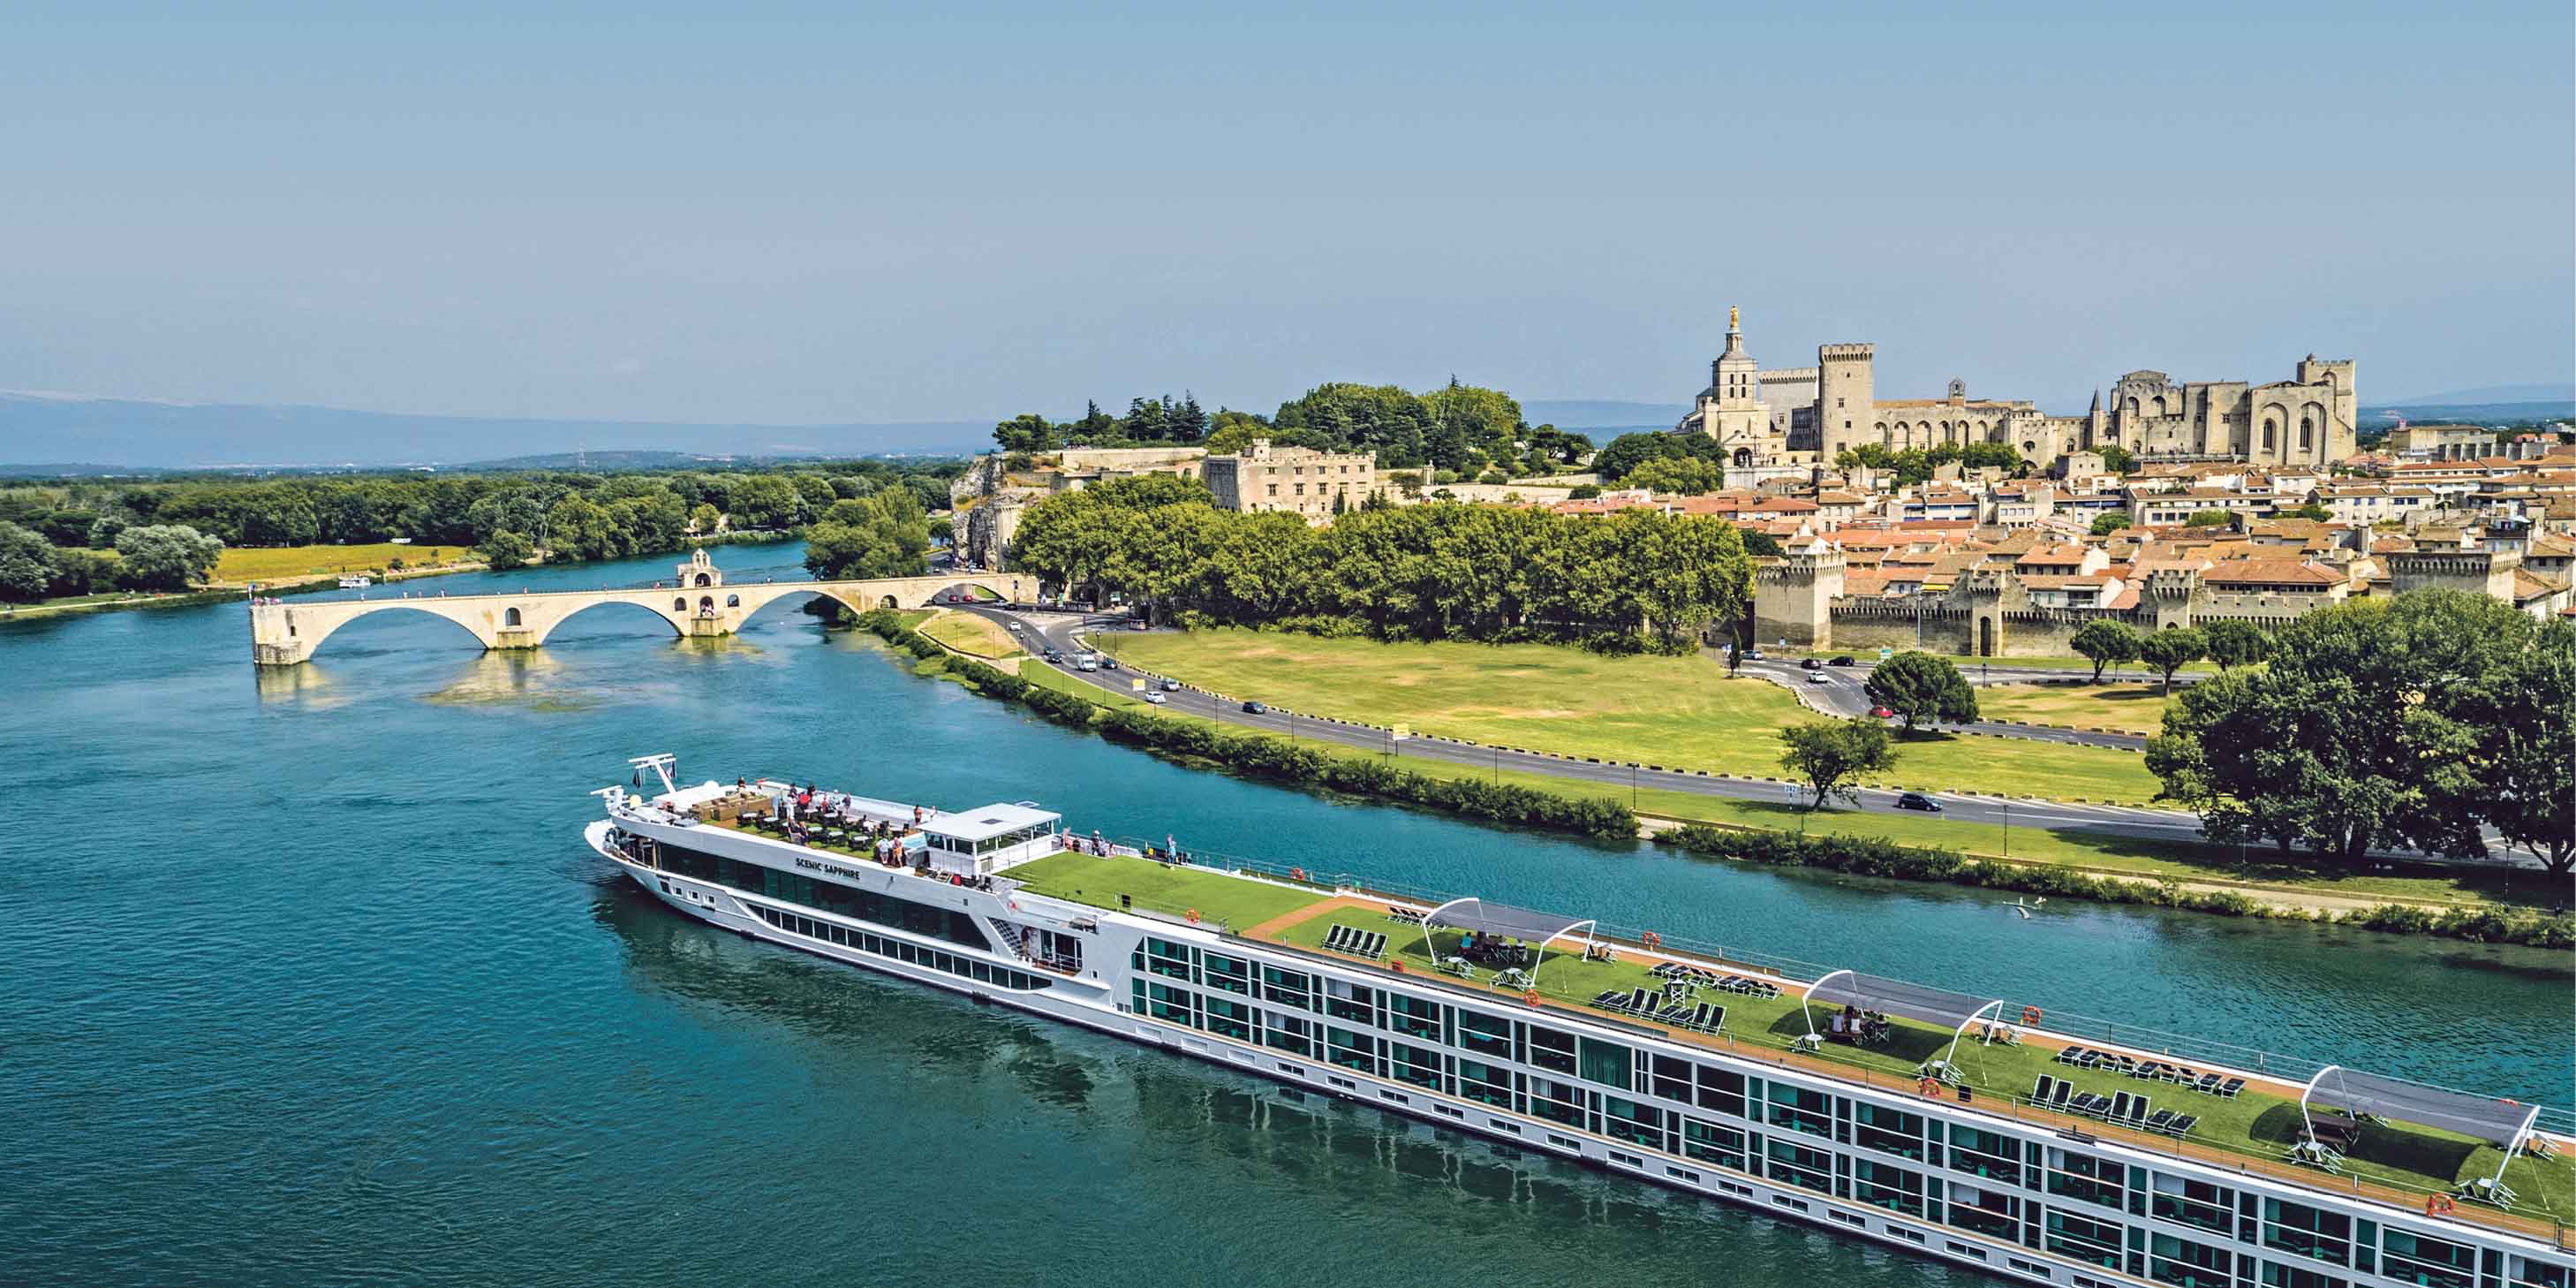 River cruise ship sailing past the Saint Bénézet stone bridge ahead and Avignon to the right